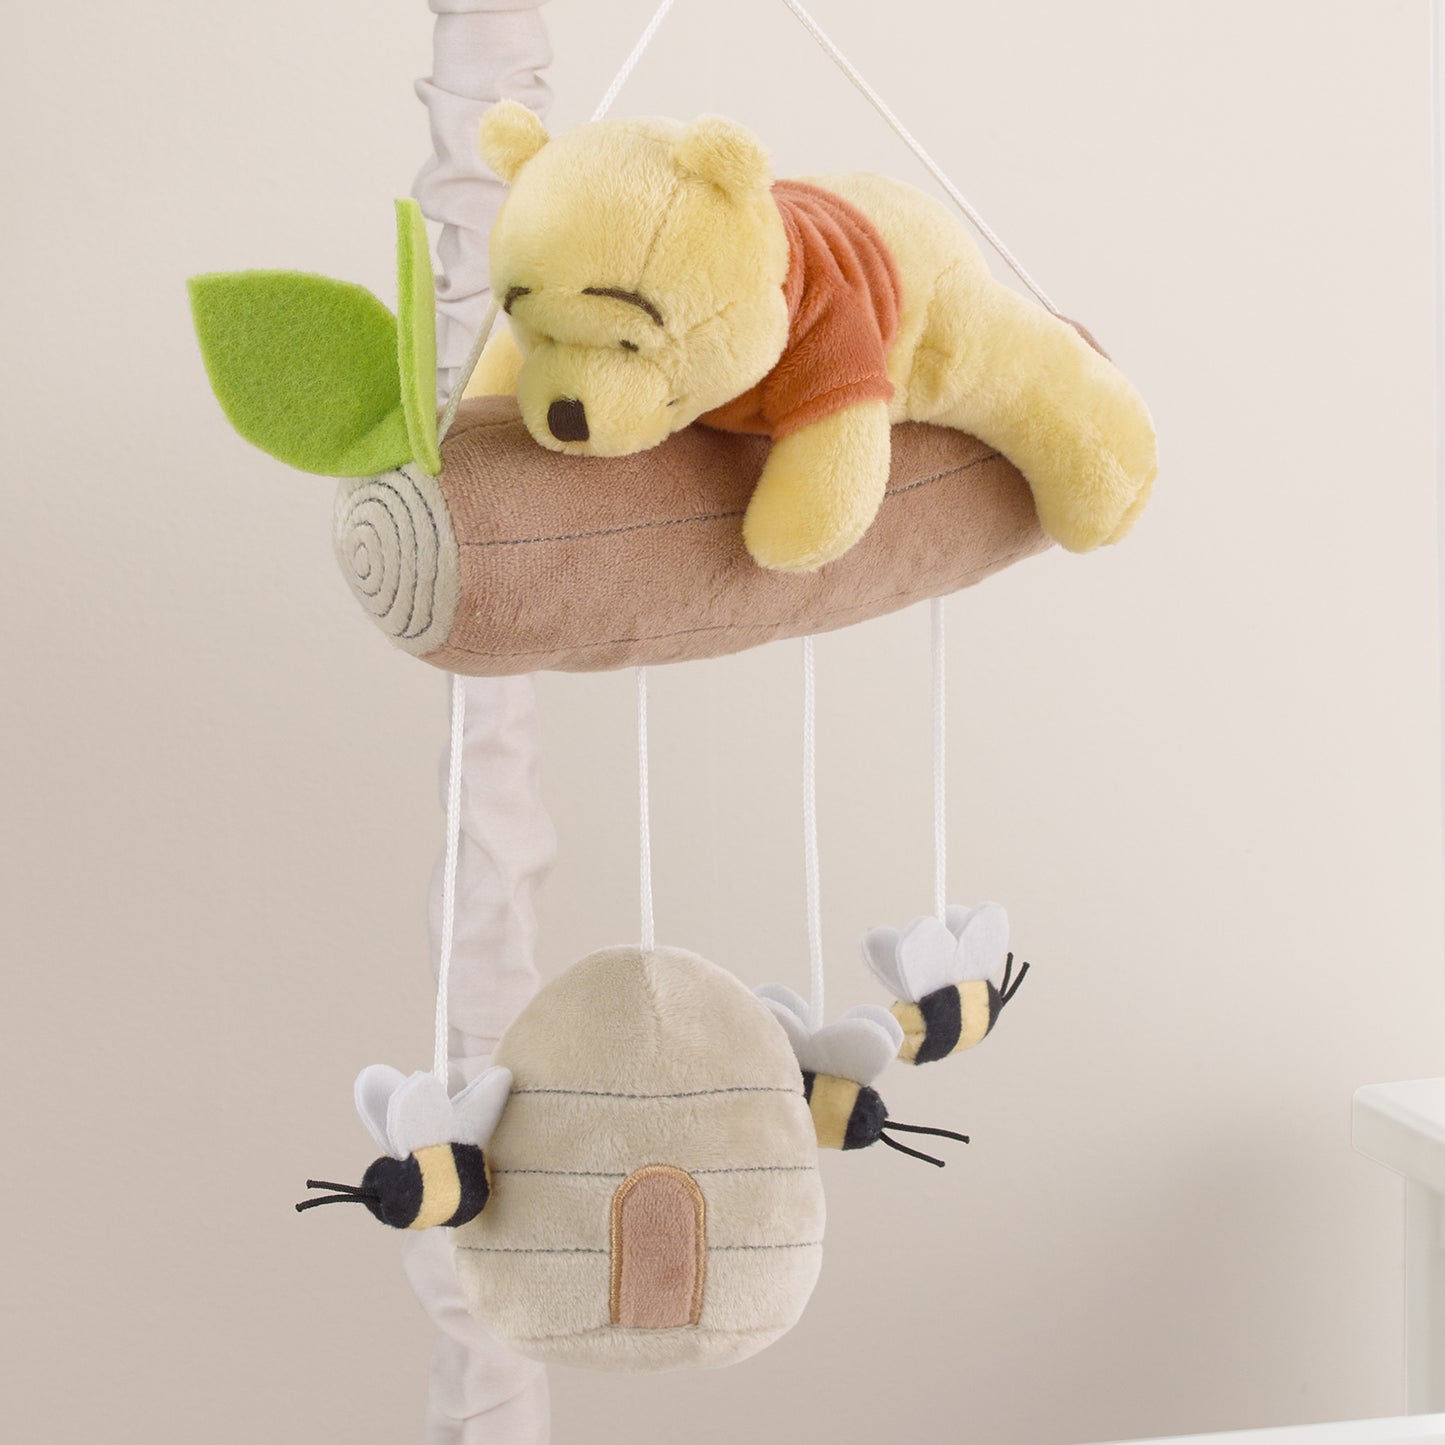 Disney Winnie the Pooh Hugs and Honeycombs Plush Musical Mobile with Bee Hive, Bees, Pooh Bear and Tree Branch